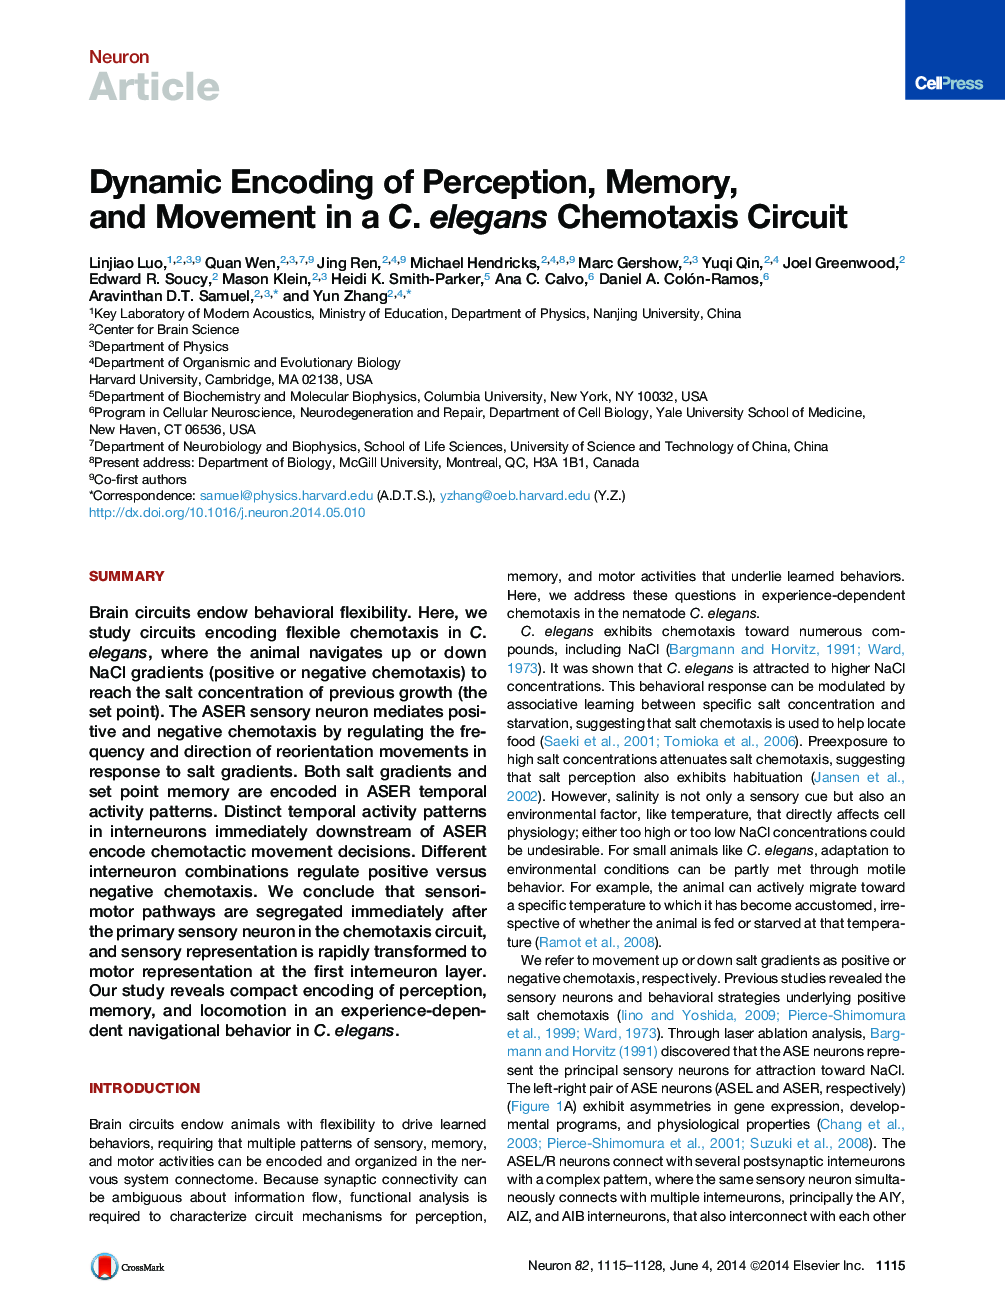 Dynamic Encoding of Perception, Memory, and Movement in a C. elegans Chemotaxis Circuit